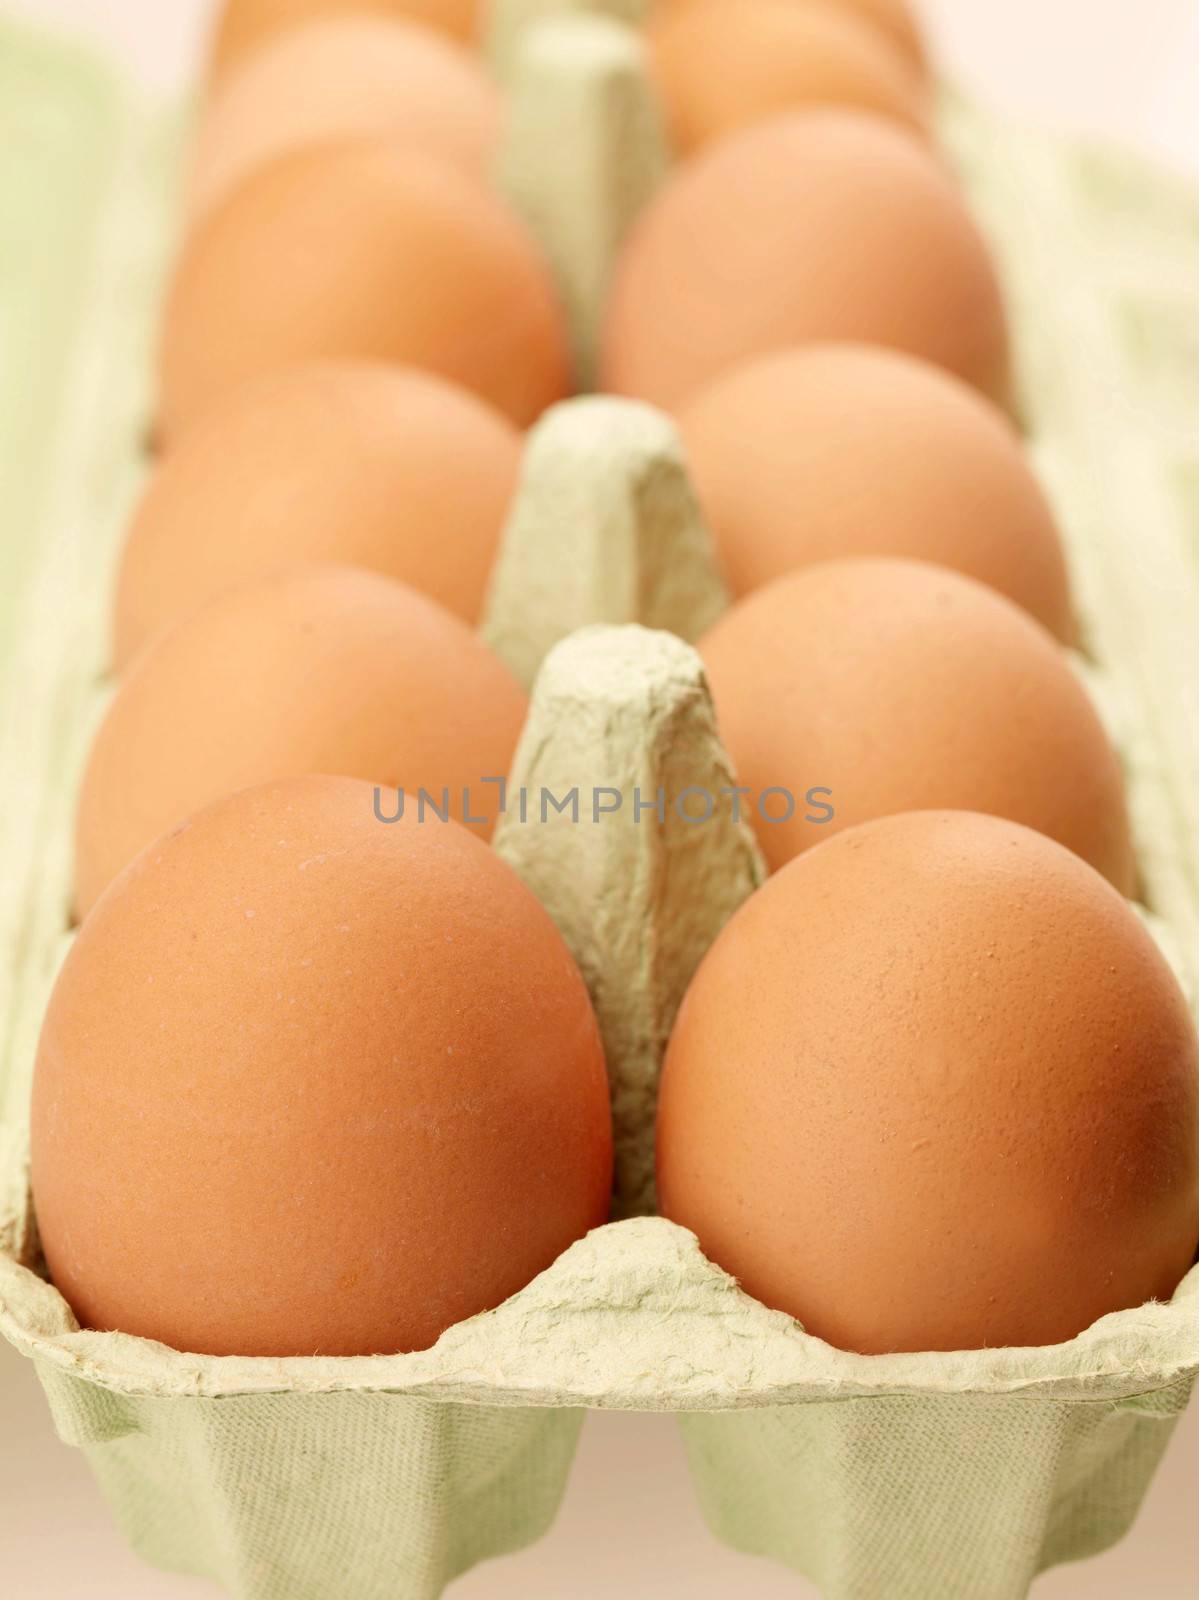 Box of Brown Chicken Eggs by Whiteboxmedia